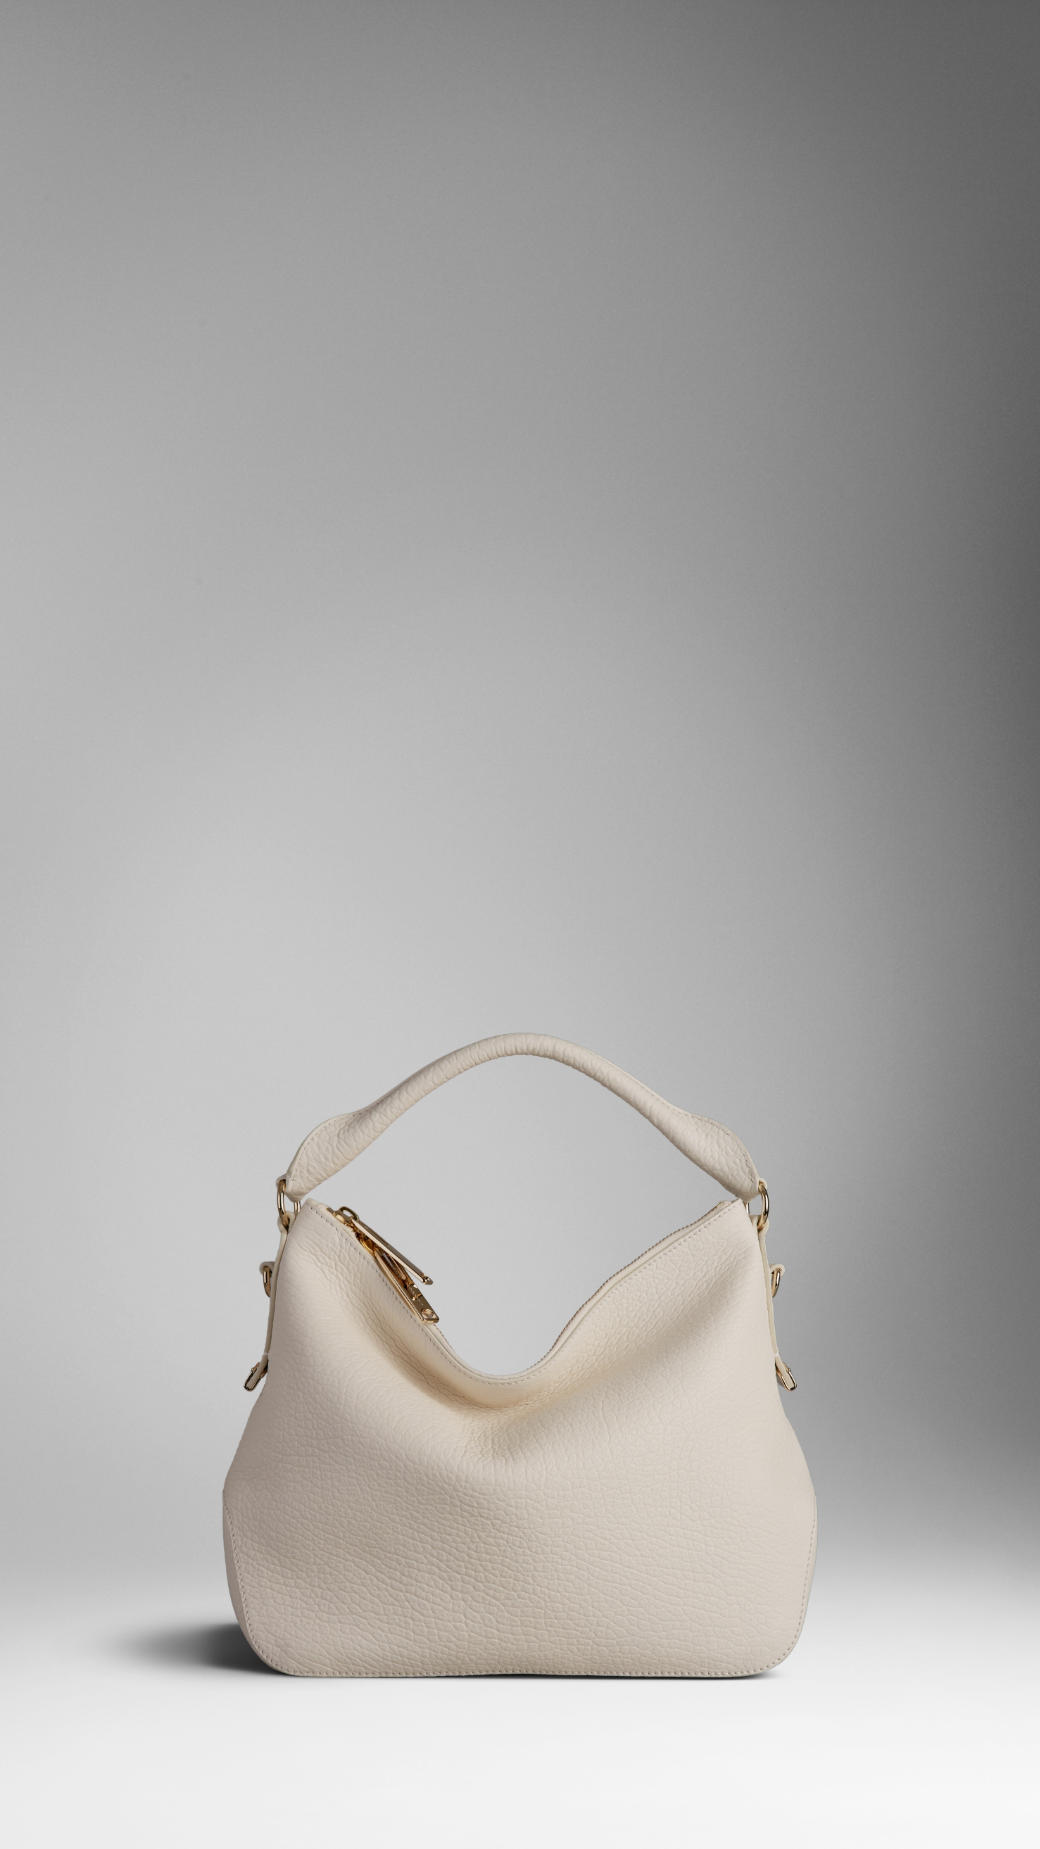 Burberry Small Heritage Grain Leather Hobo Bag in White